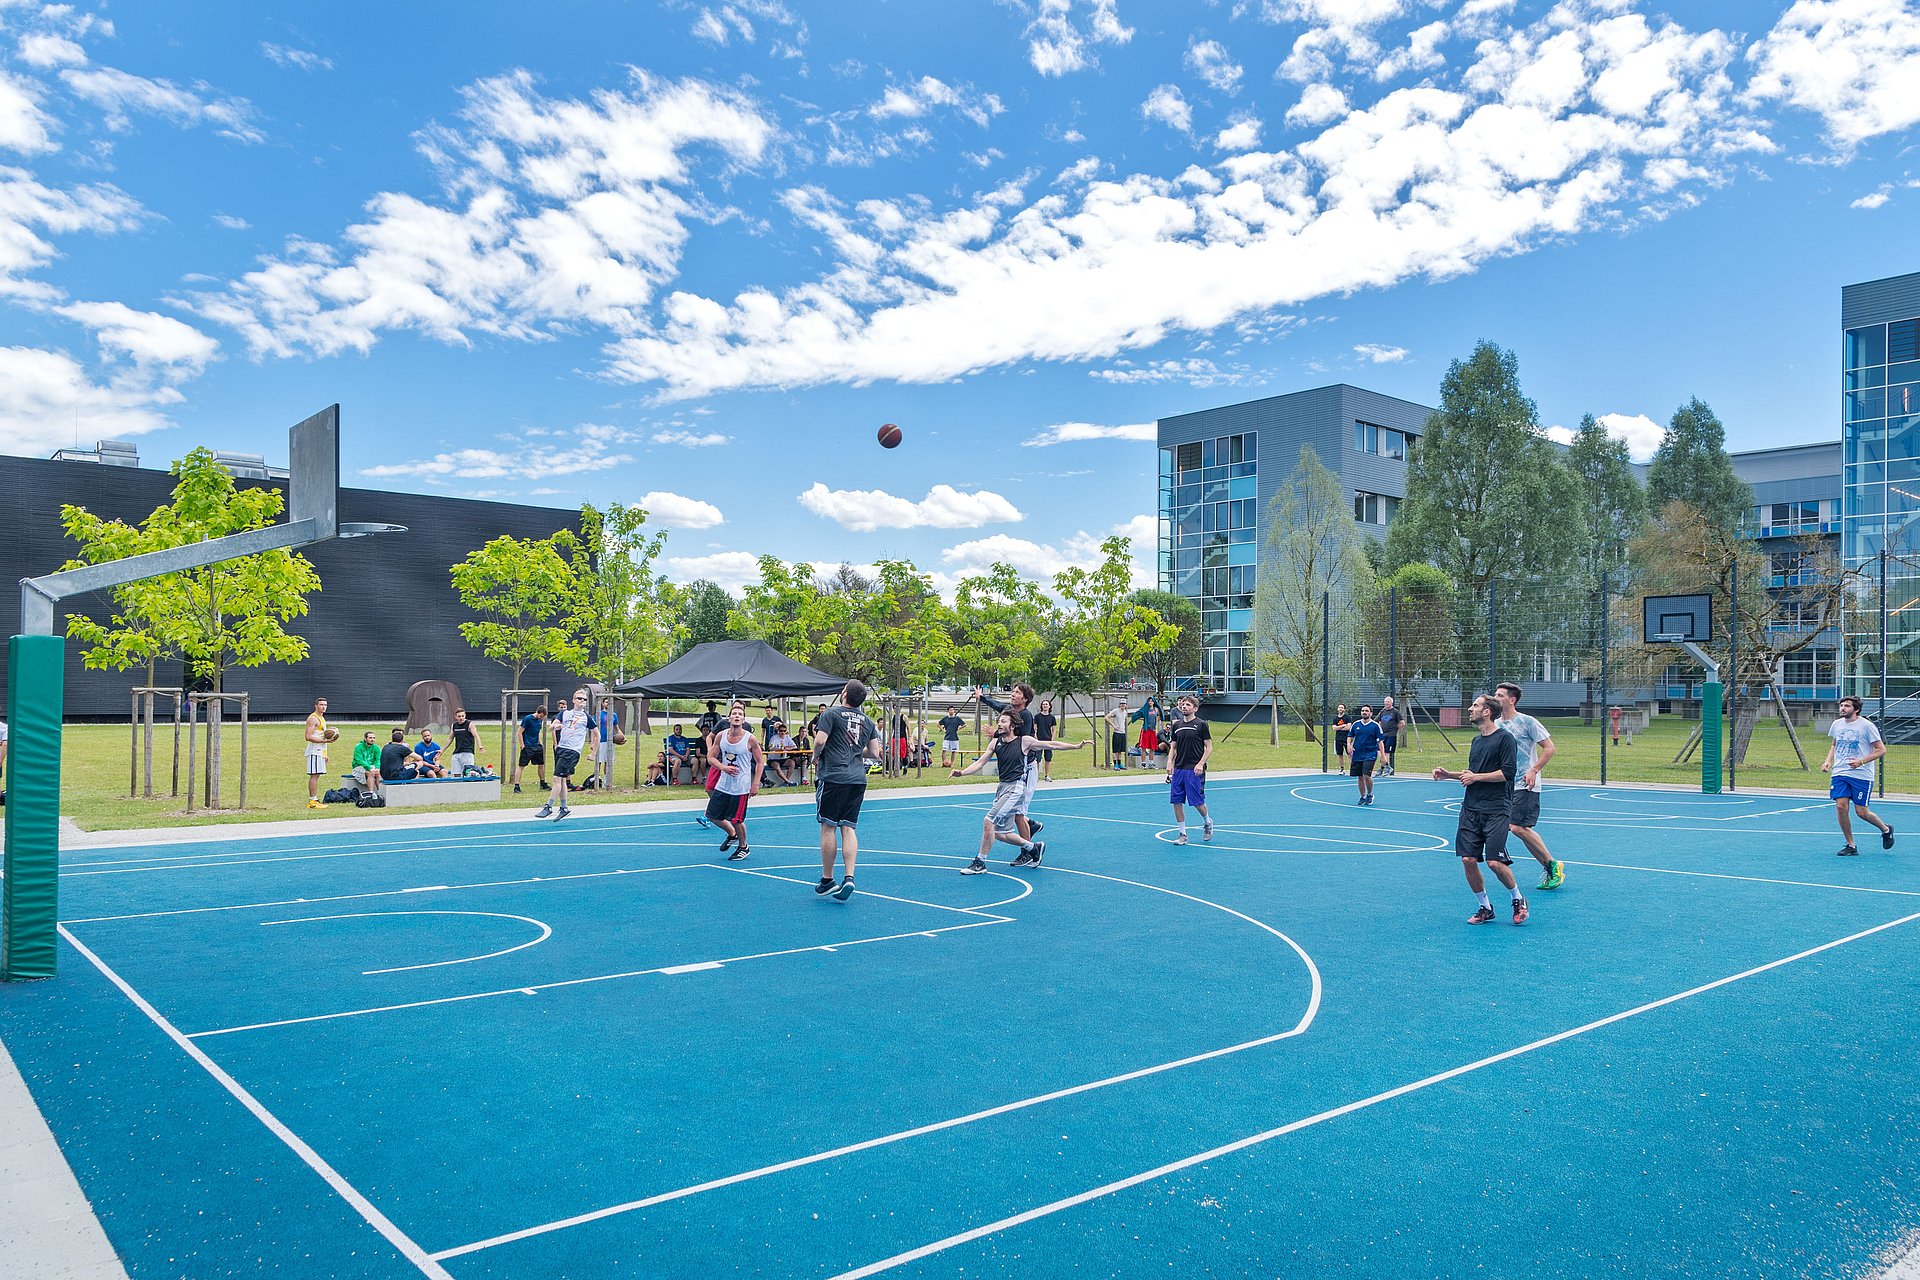 Students playing basketball on the court in the middle of the campus Garching